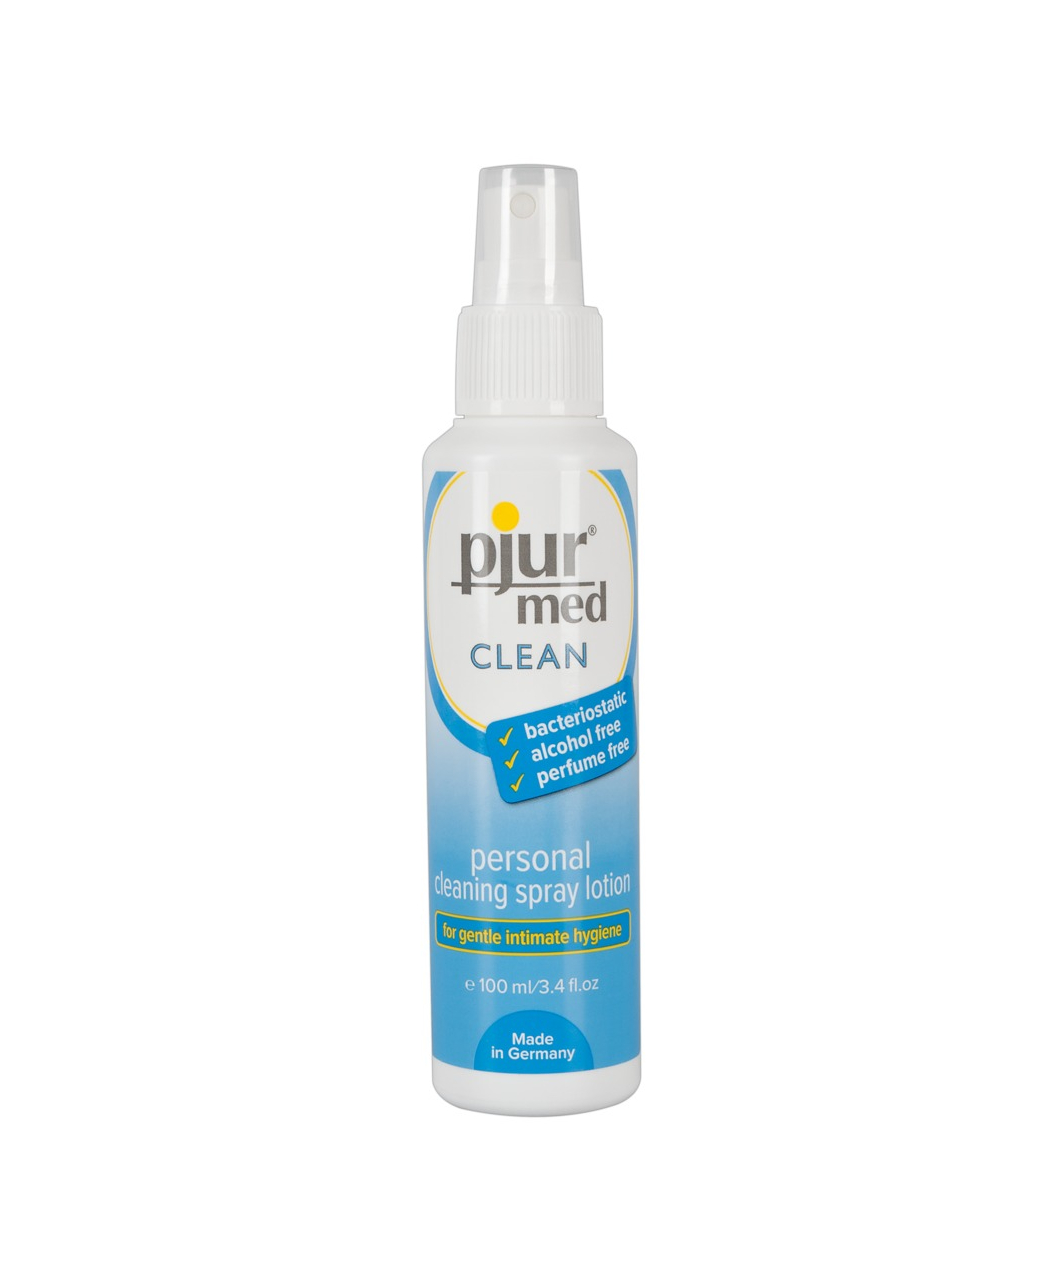 pjur med Clean personal cleaning spray lotion (100 ml)